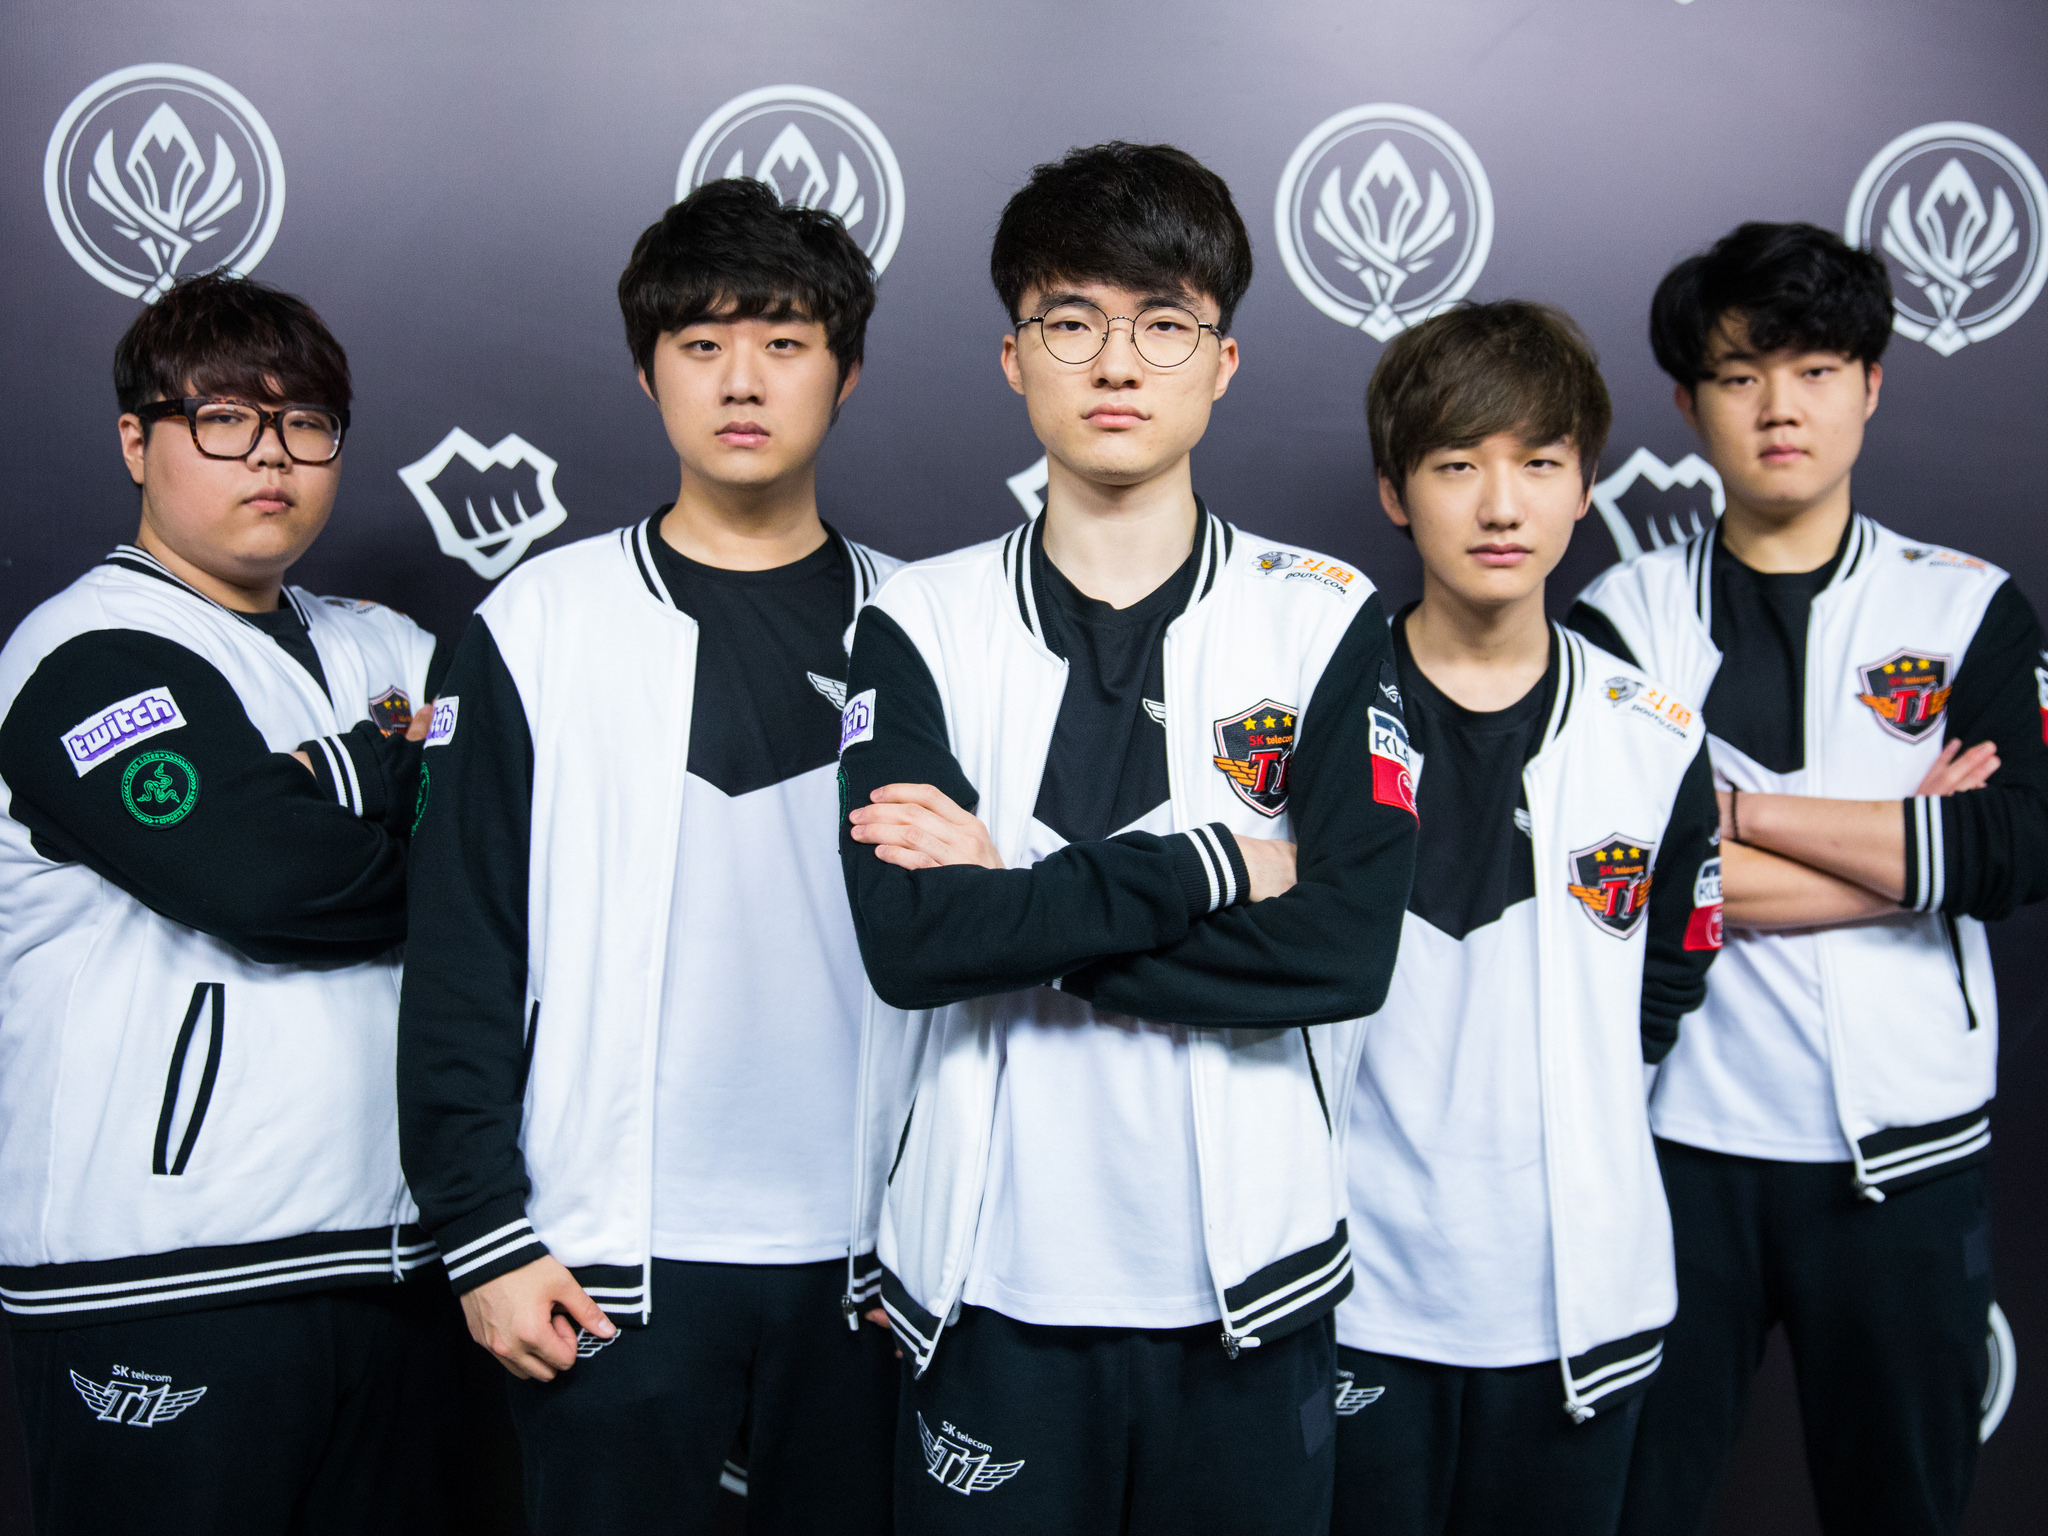 SKT defeated Samsung before the two teams even stepped on the Rift